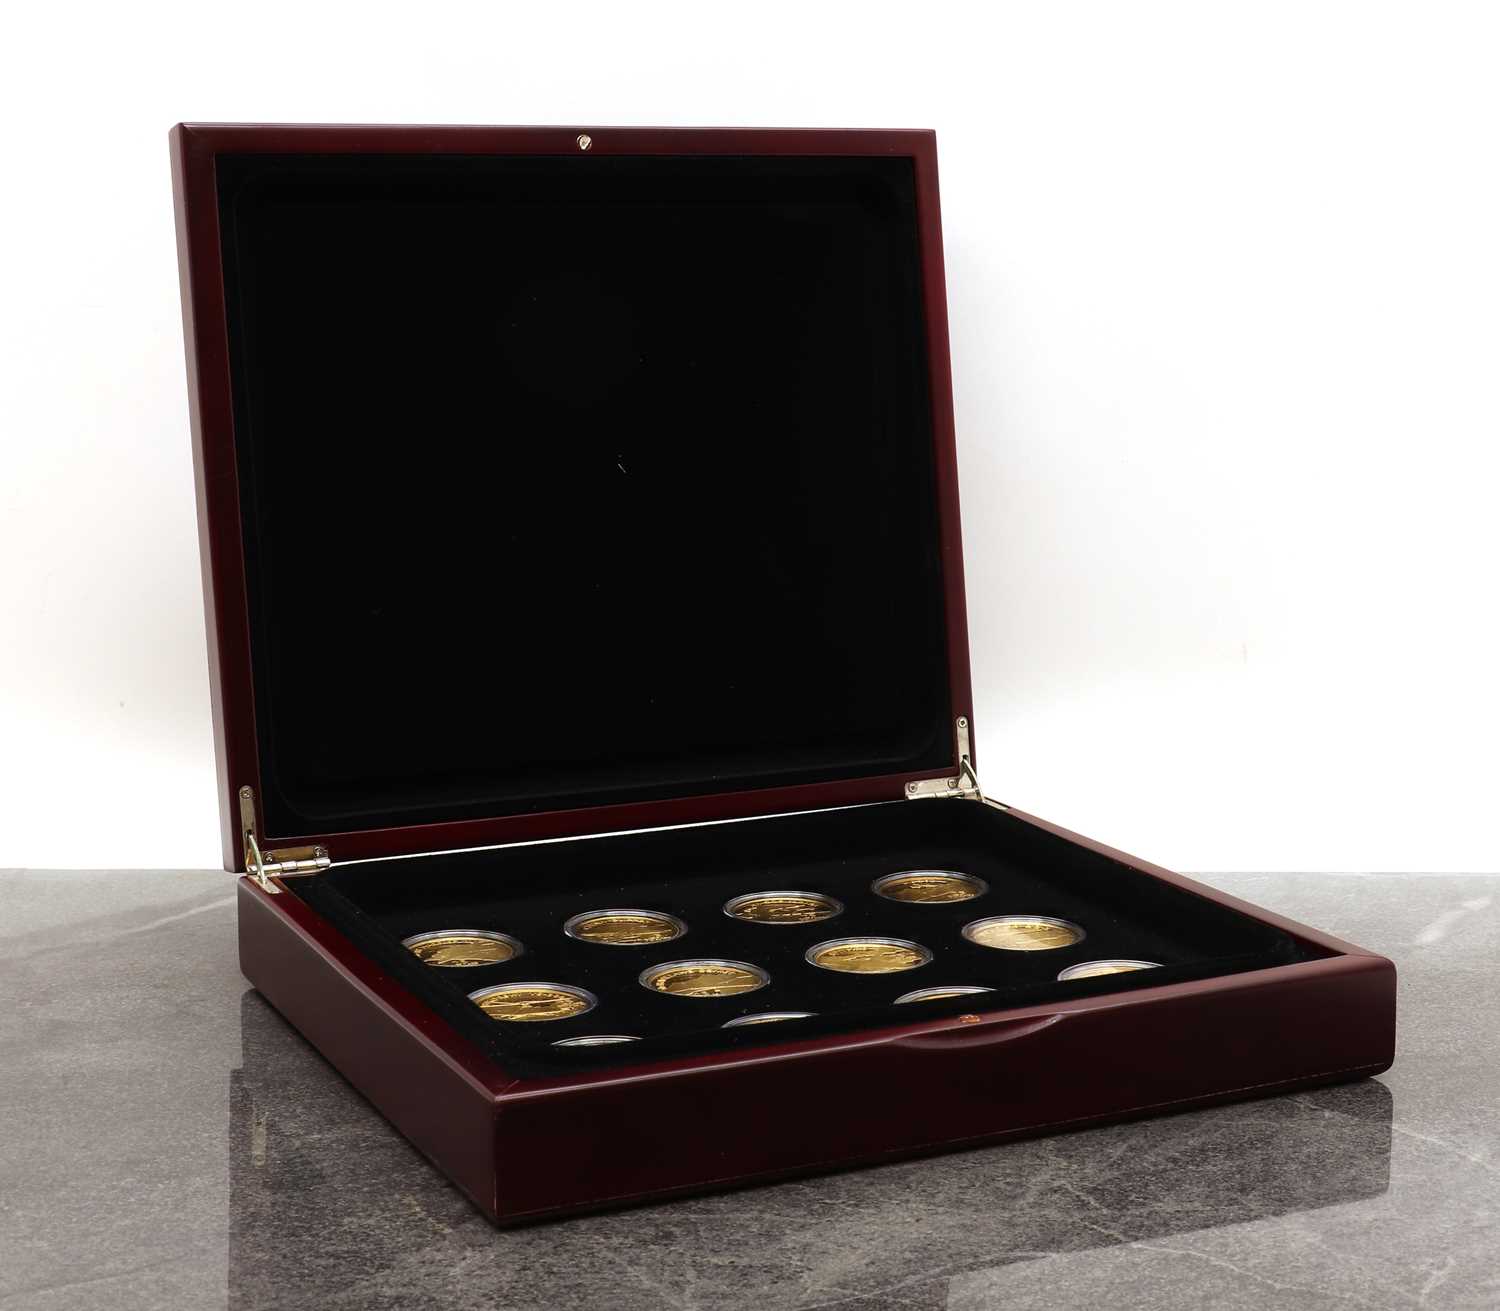 A set of twelve gold plated 999 fine silver proof crown size coins, - Image 2 of 5